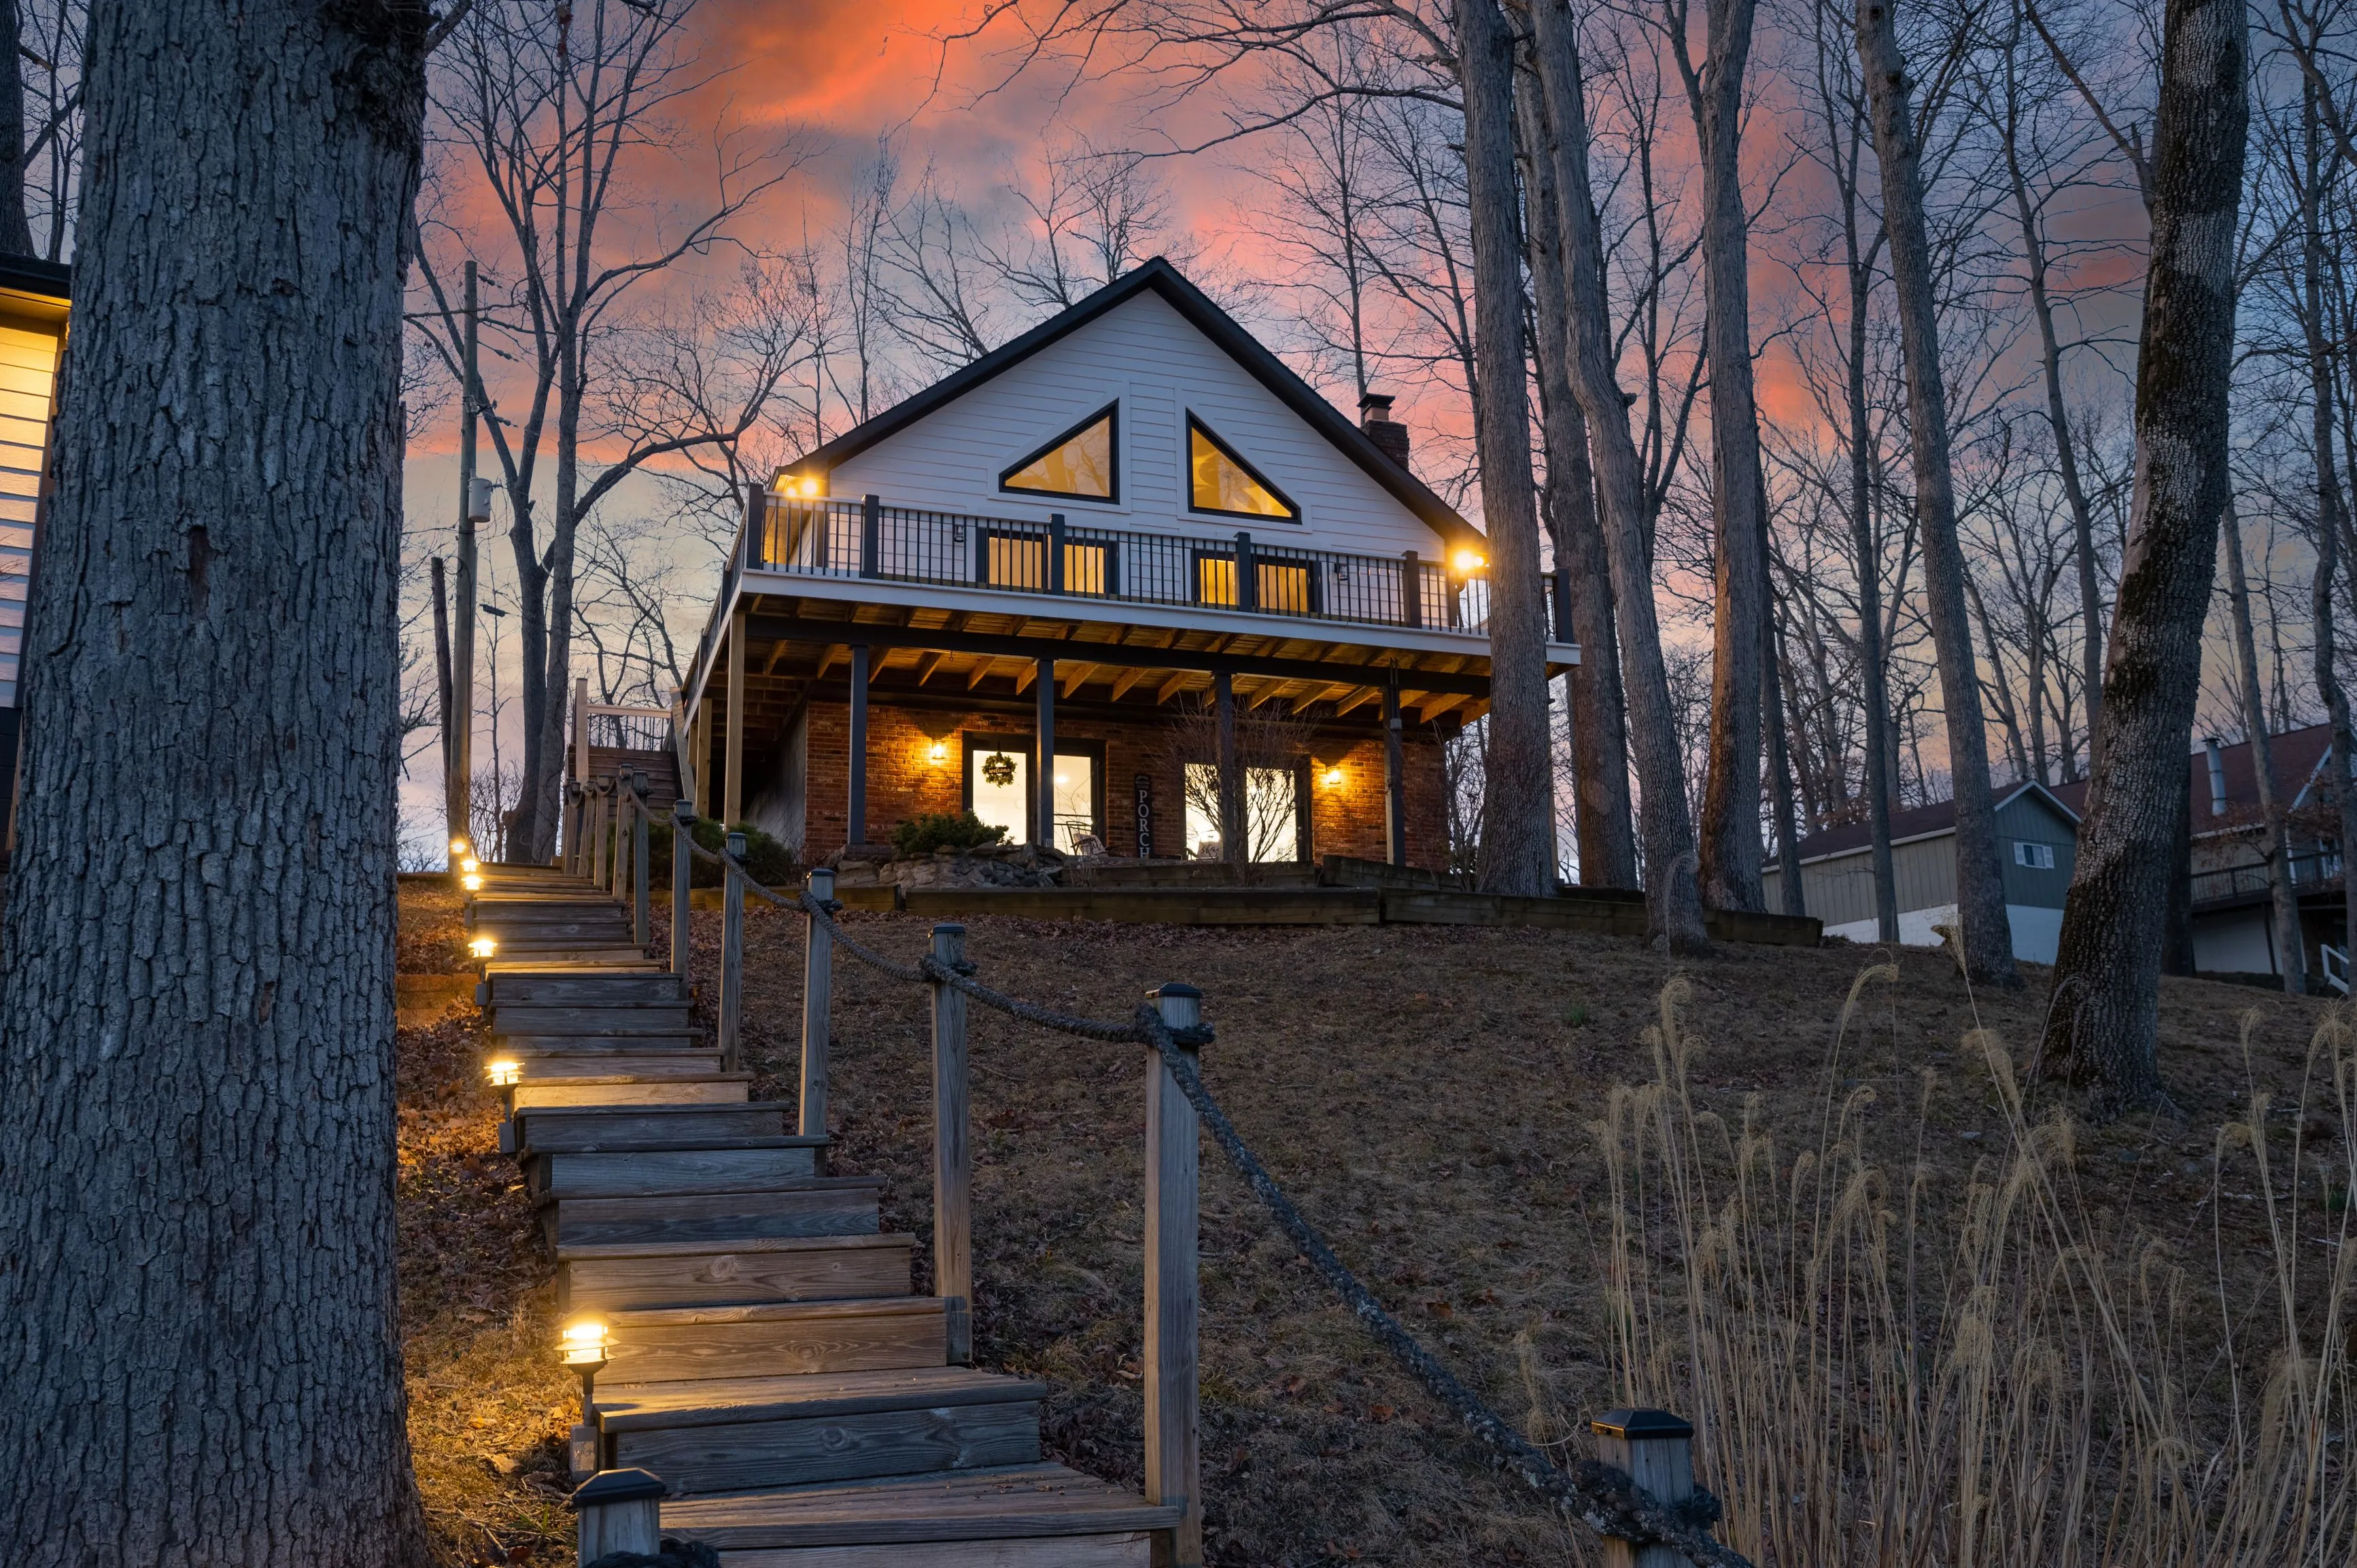 Twilight scene featuring a cozy two-story house with lit windows at the end of a stairway flanked by leafless trees under a pink-hued sky.